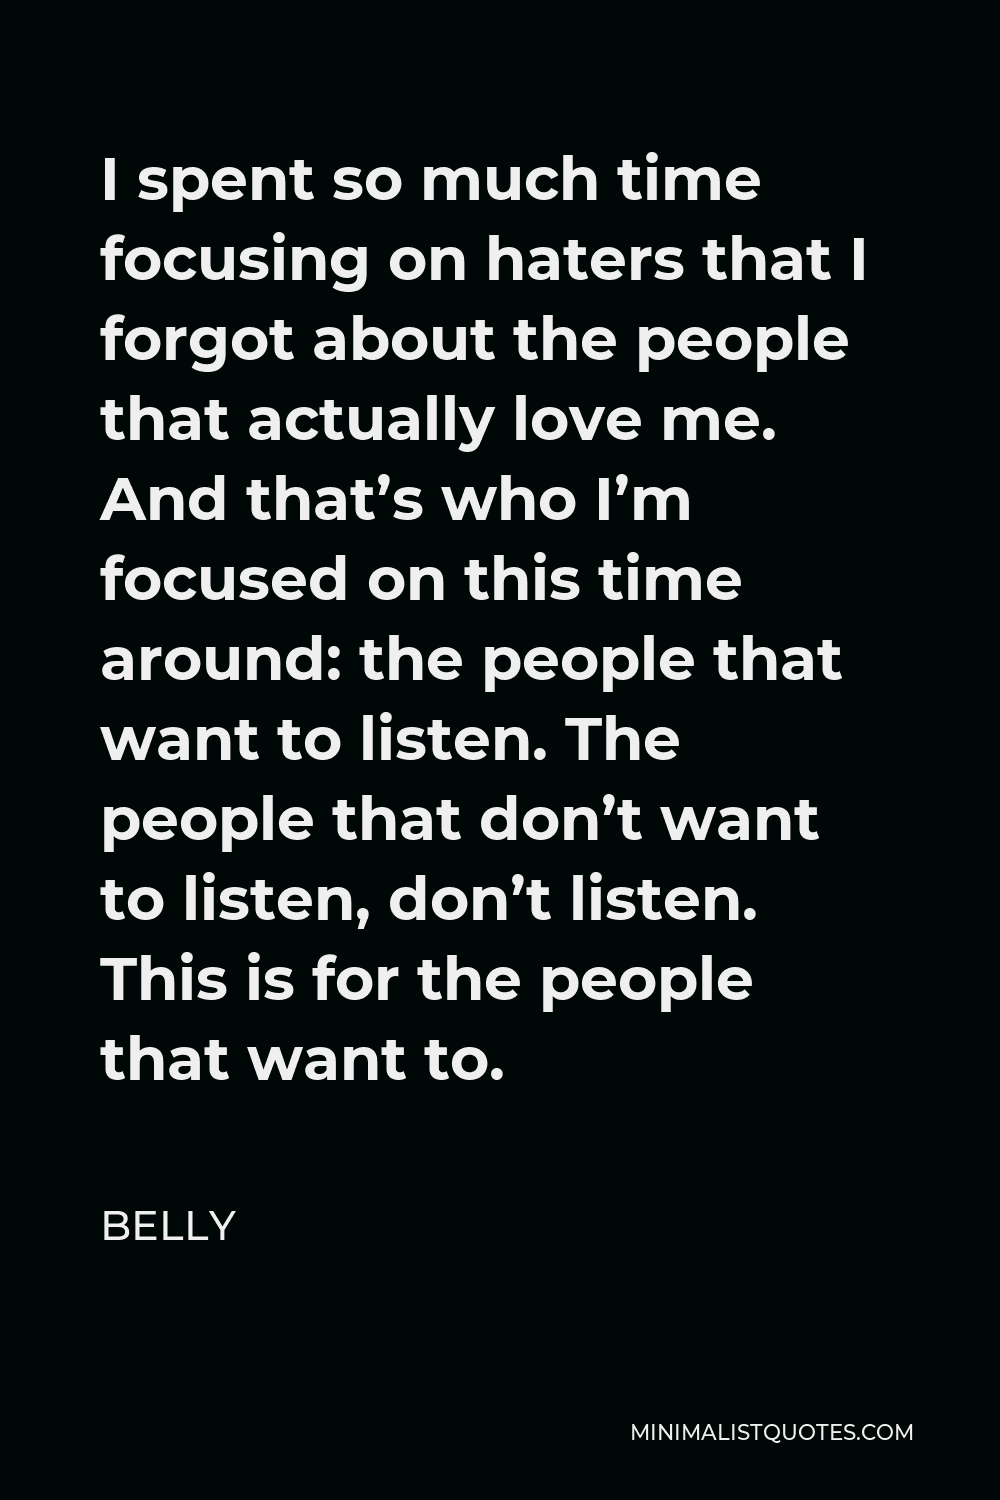 Belly Quote - I spent so much time focusing on haters that I forgot about the people that actually love me. And that’s who I’m focused on this time around: the people that want to listen. The people that don’t want to listen, don’t listen. This is for the people that want to.